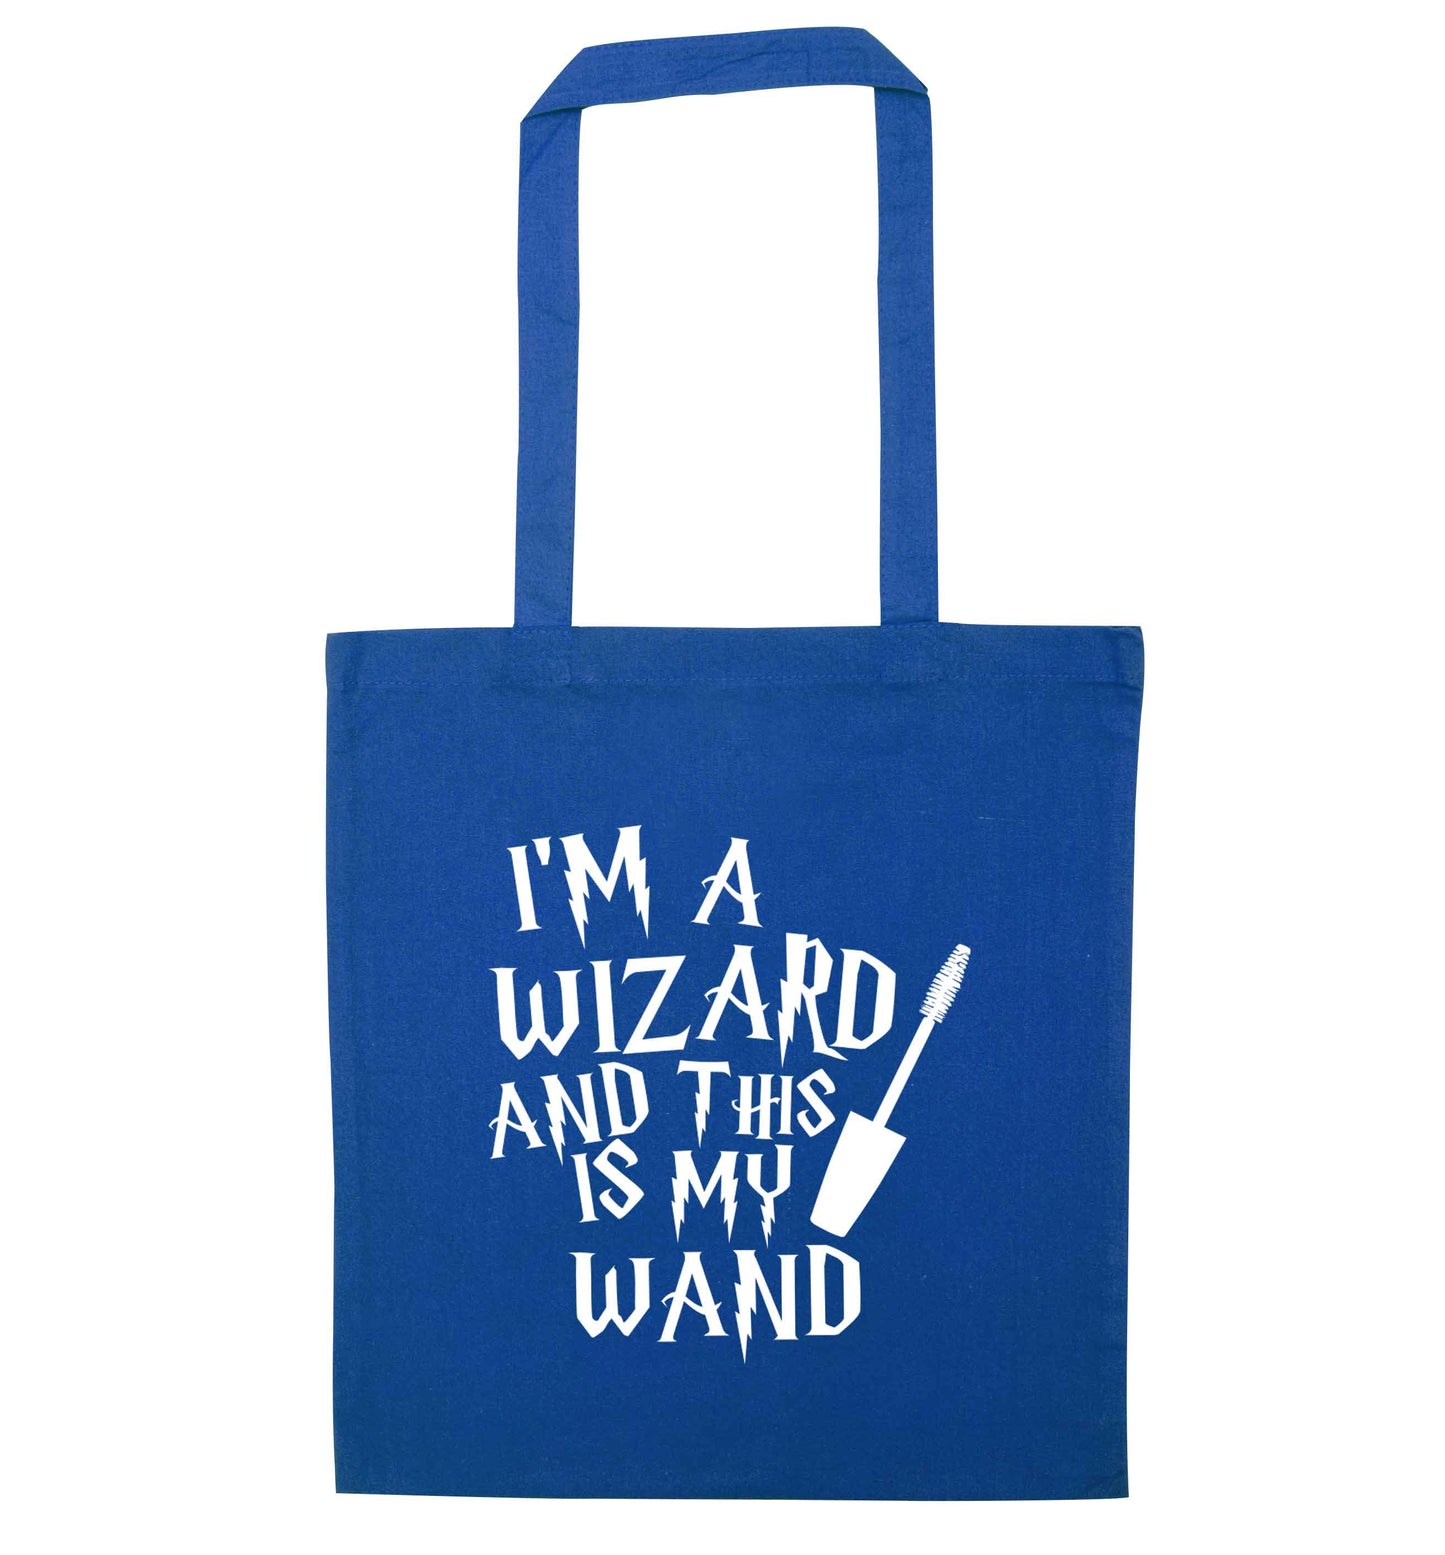 I'm a wizard and this is my wand blue tote bag